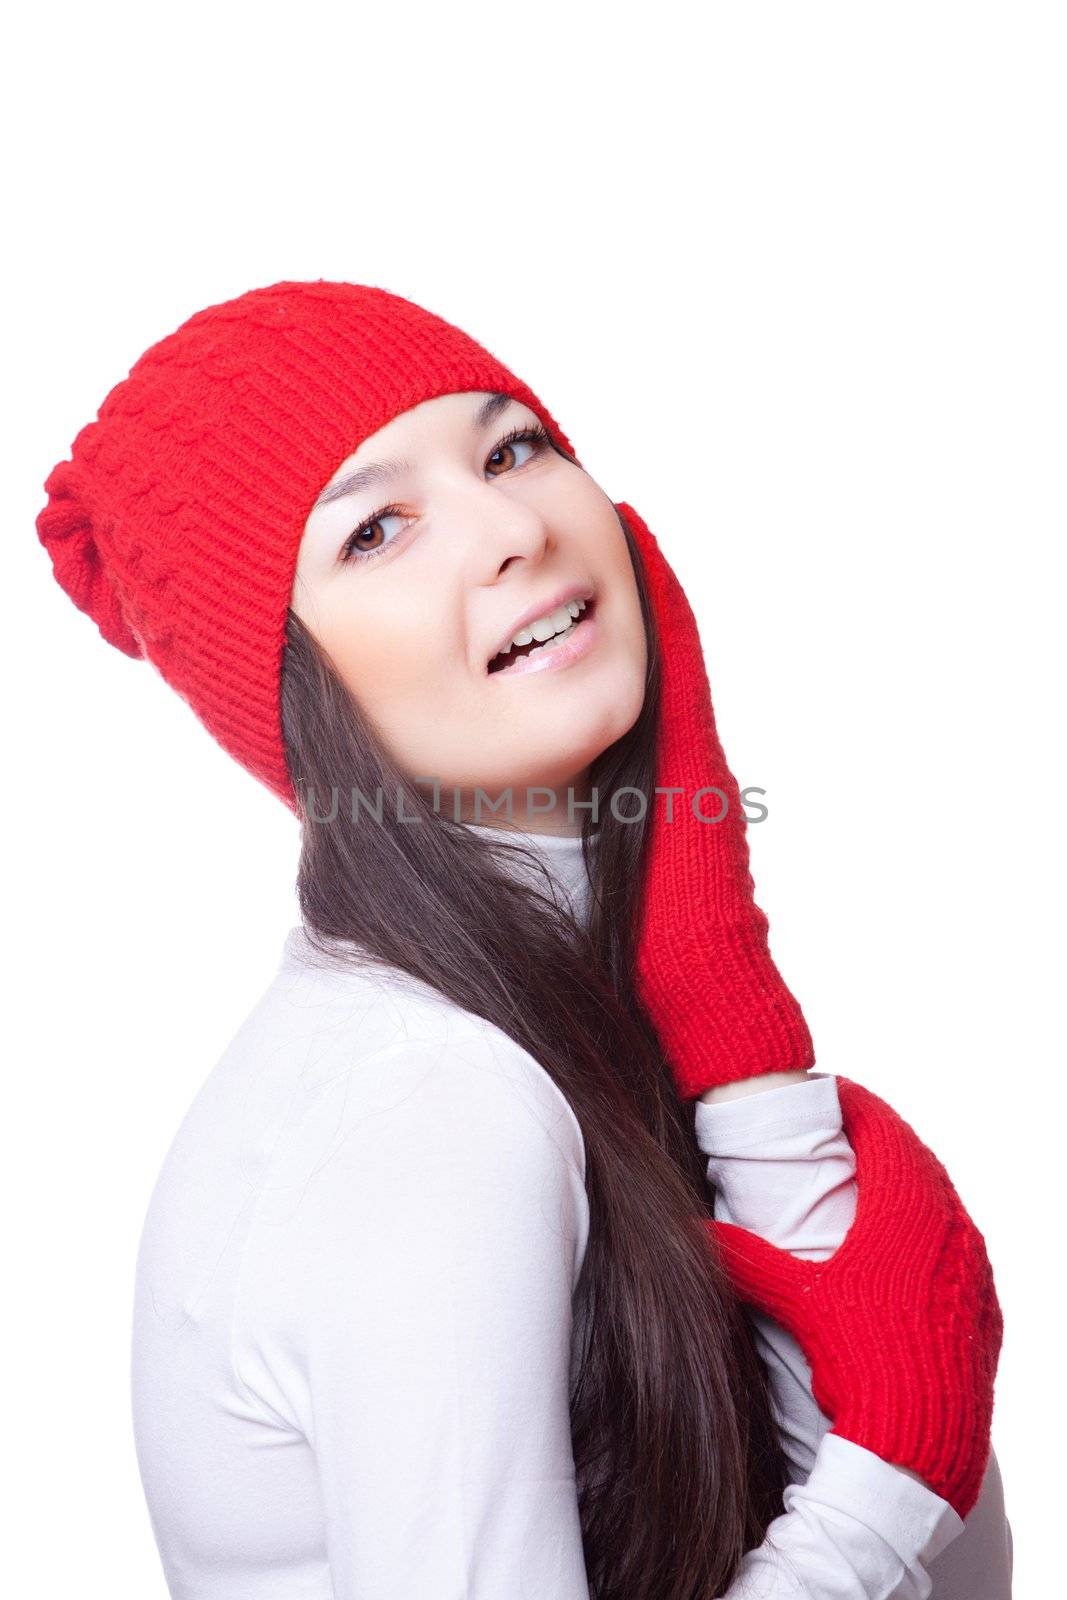 beauty woman in a red cap isolated on white background